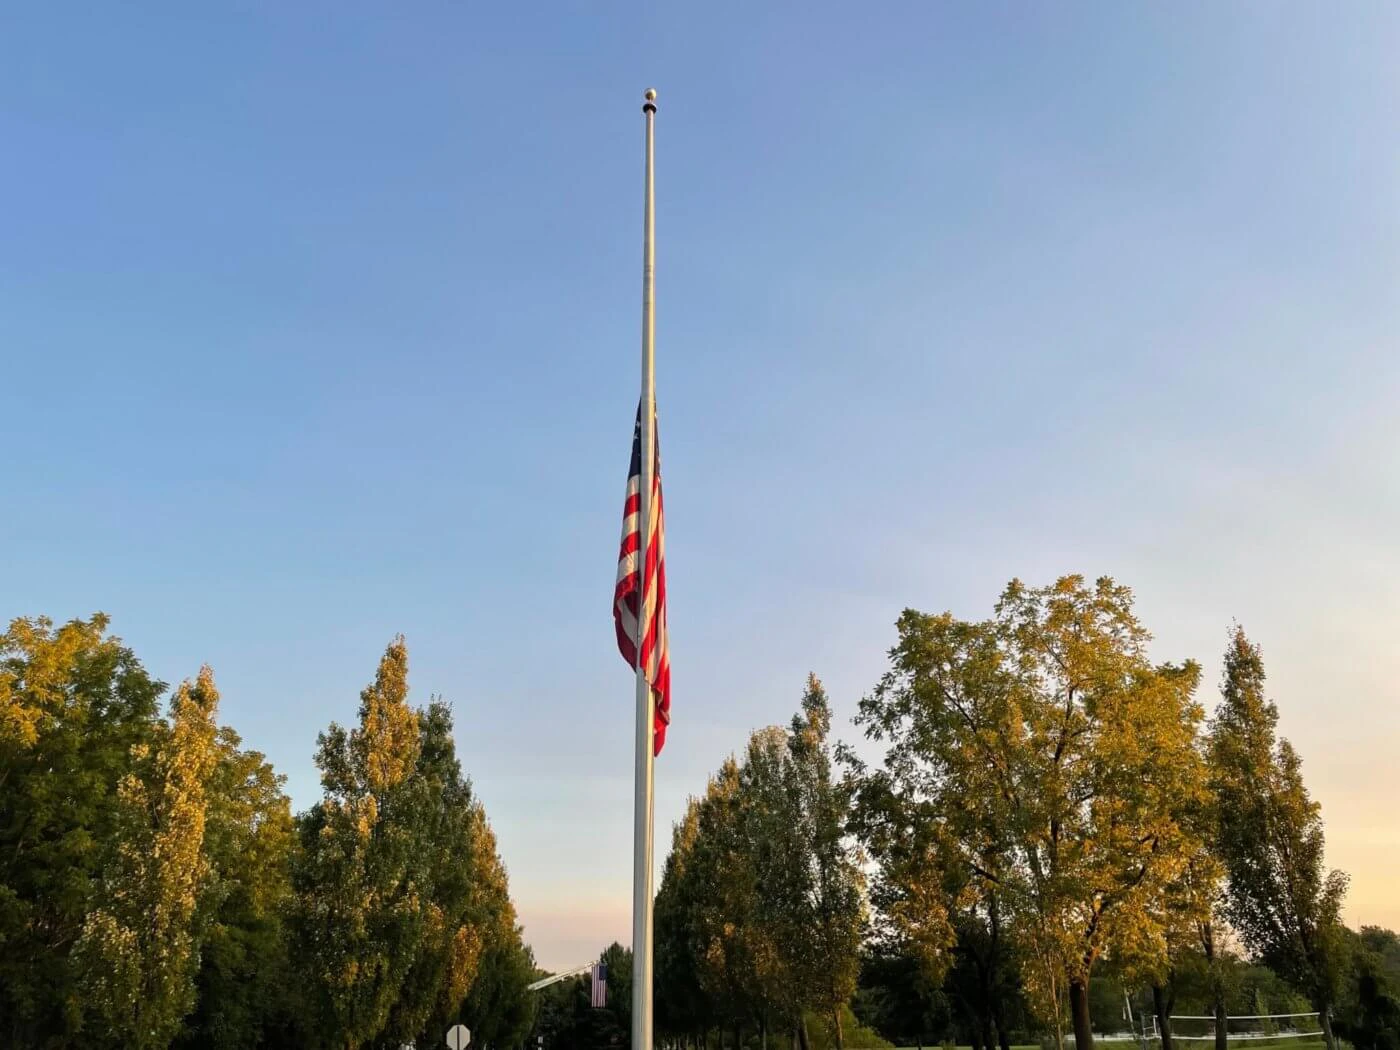 The 9/11 Tribute Flag flies at half-mast over the Garden of Reflection 9/11 Memorial in Bucks County. Three pilots, who were friends with United Airlines Flight 175 pilot Victor Saracini, have taken the flag on flights over each of the crash sites. The 9/11 Tribute Flag is believed to be the only flag that has flown in the air above all three crash sites. (Keystone Photo/Patrick Berkery)